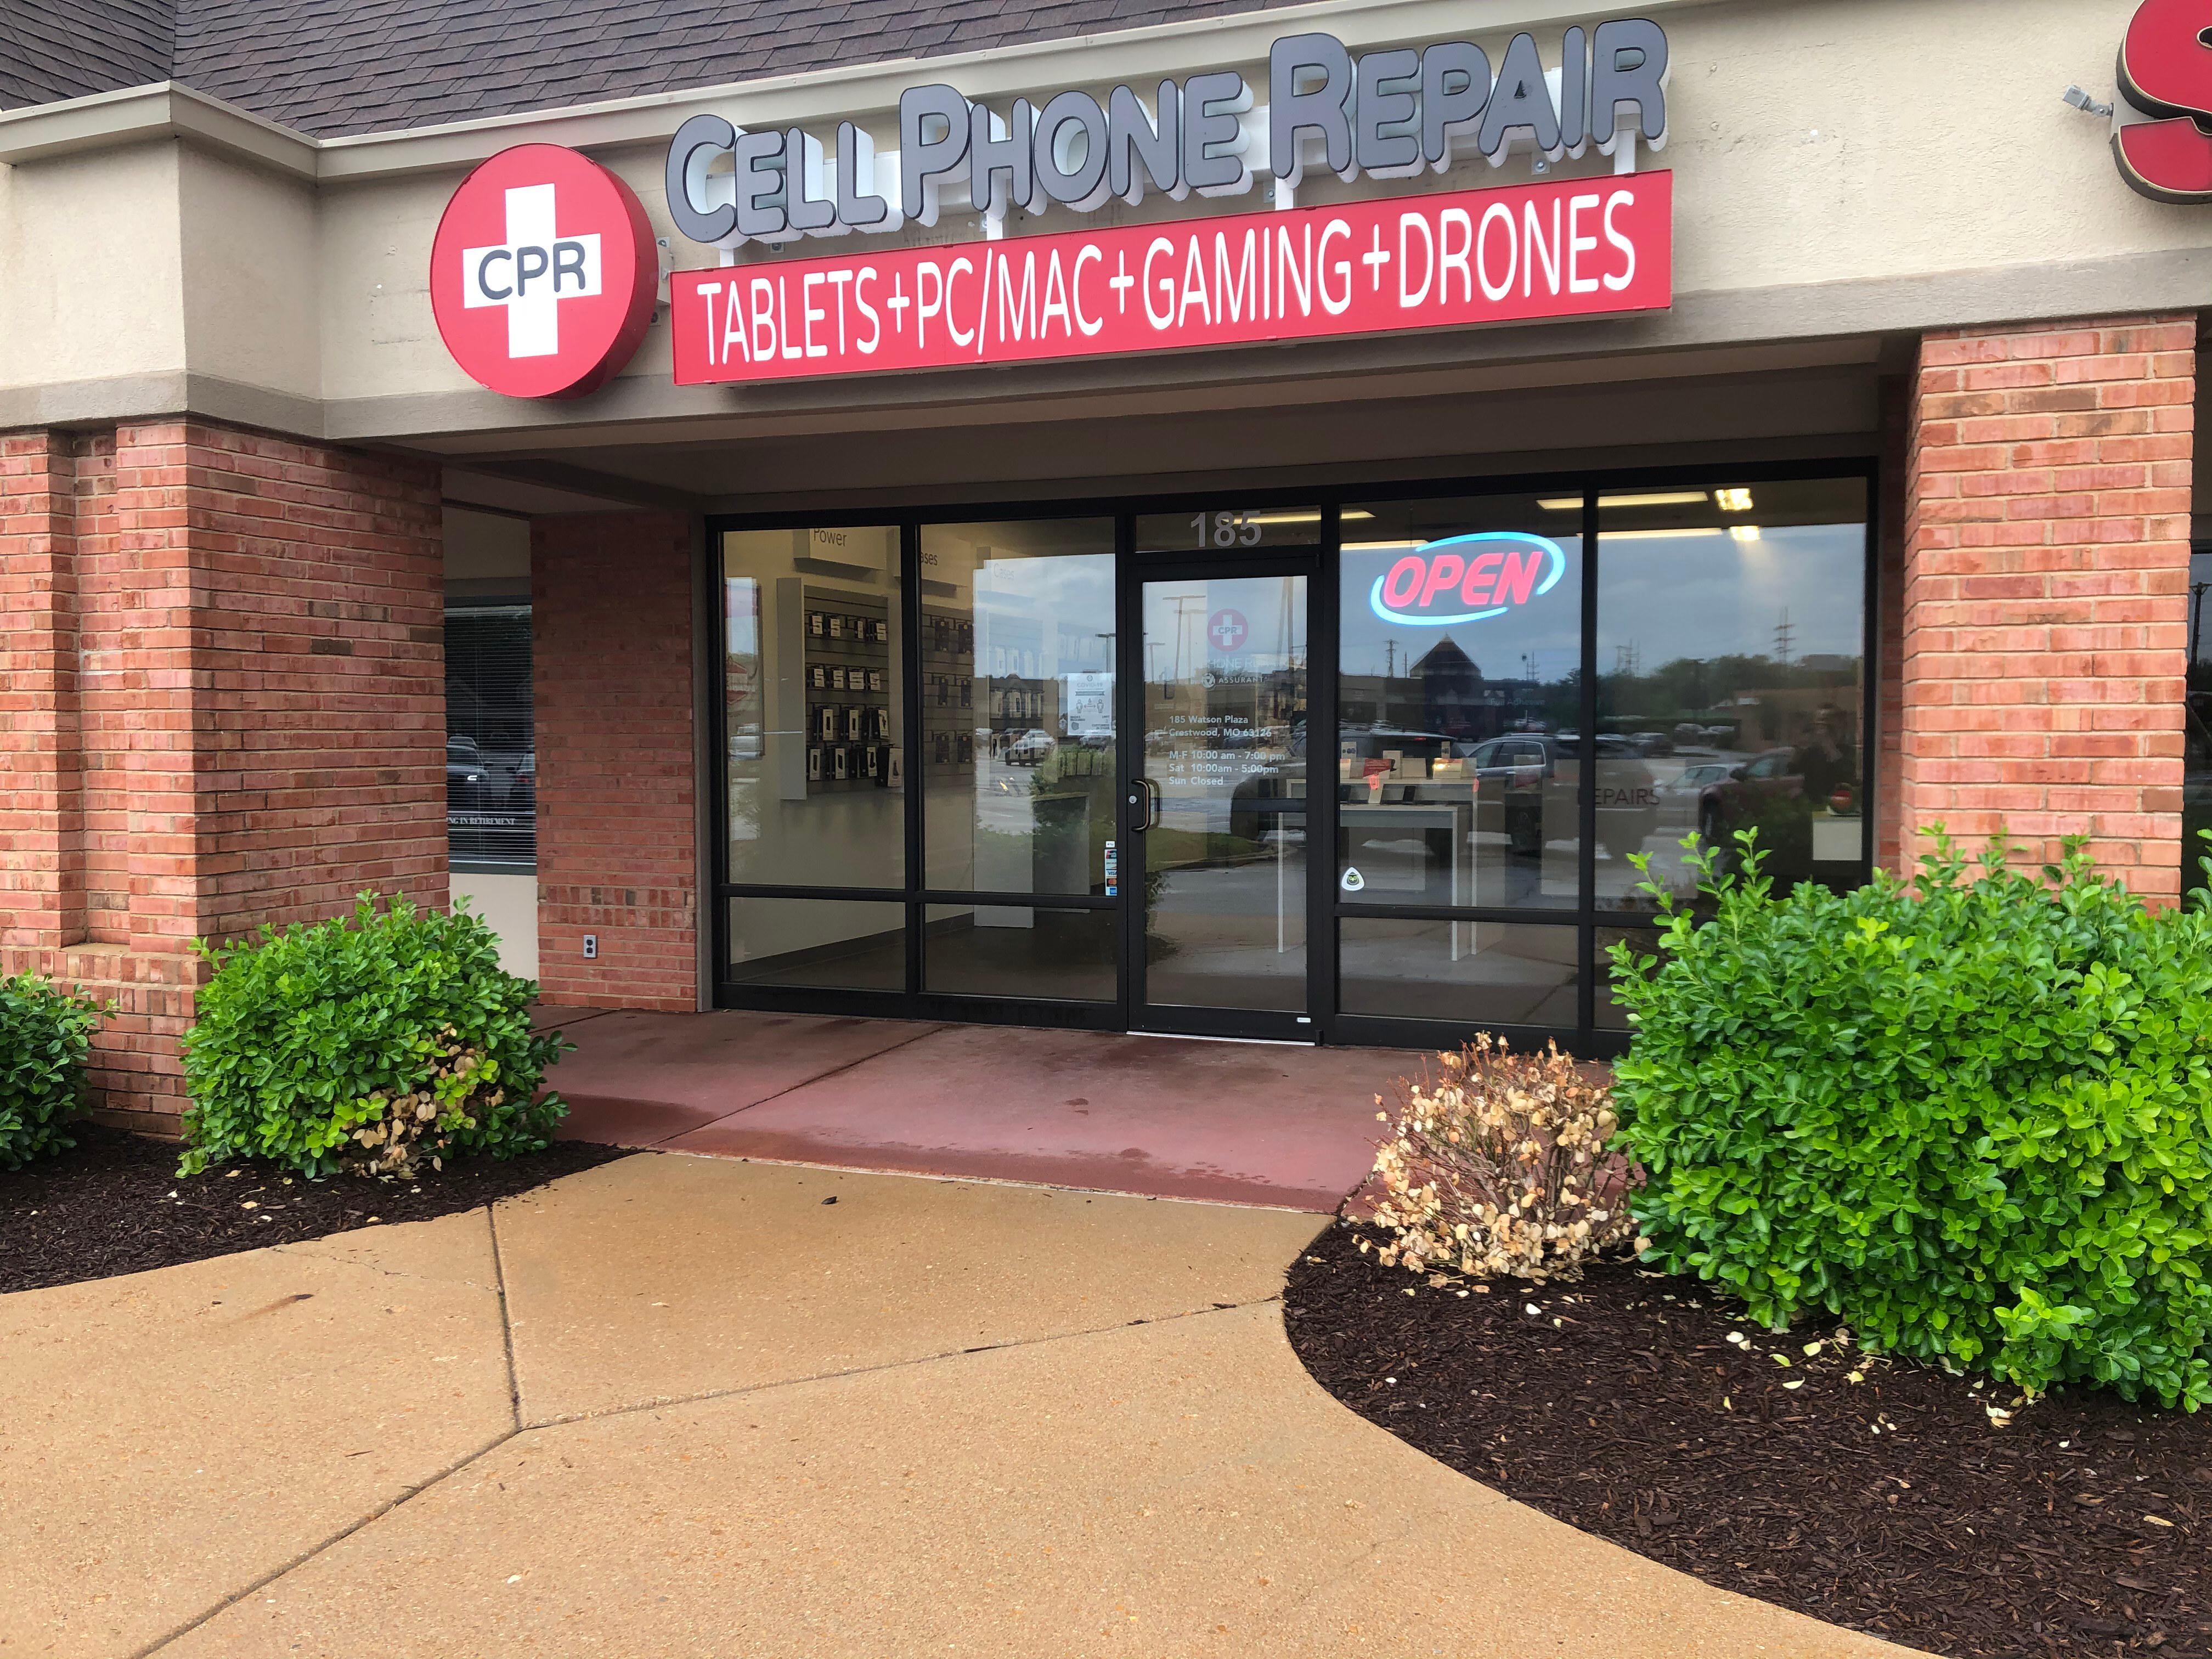 Storefront Image of CPR Cell Phone Repair Crestwood MO